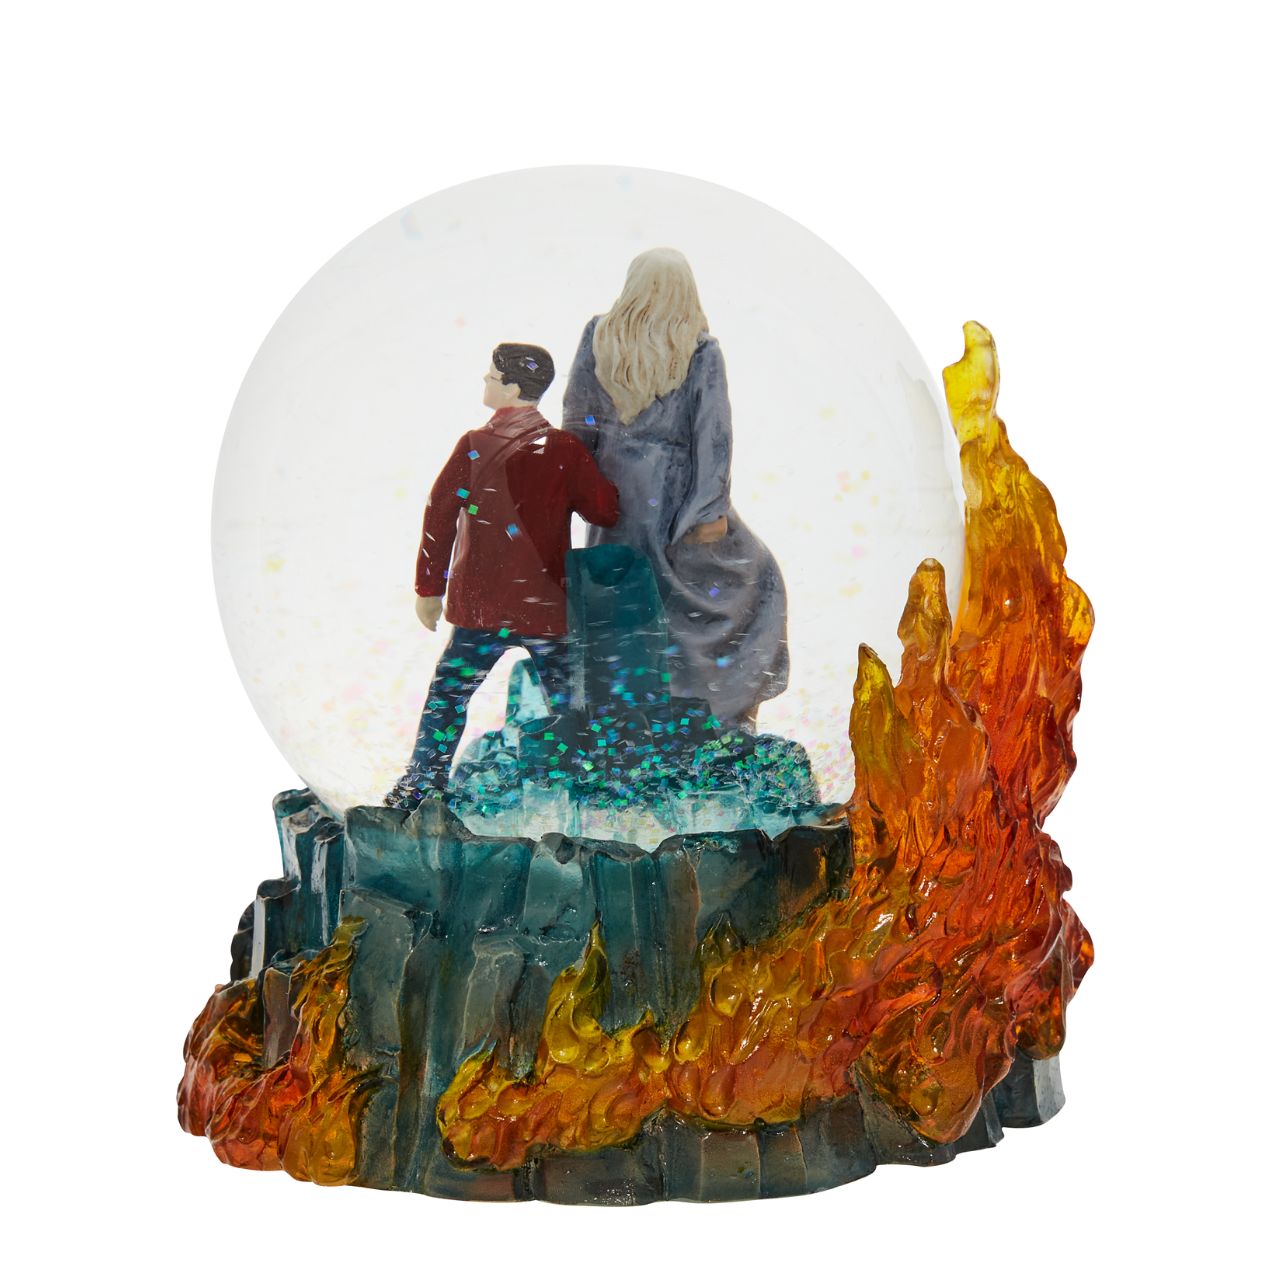 The Half Blood Prince Waterball  Based on the film poster for Harry Potter and the Half Blood Prince, this water captures Harry Potter and Professor Dumbledore on their quest. This piece has been hand painted using the highest quality cast stone to ensure all details are captured.